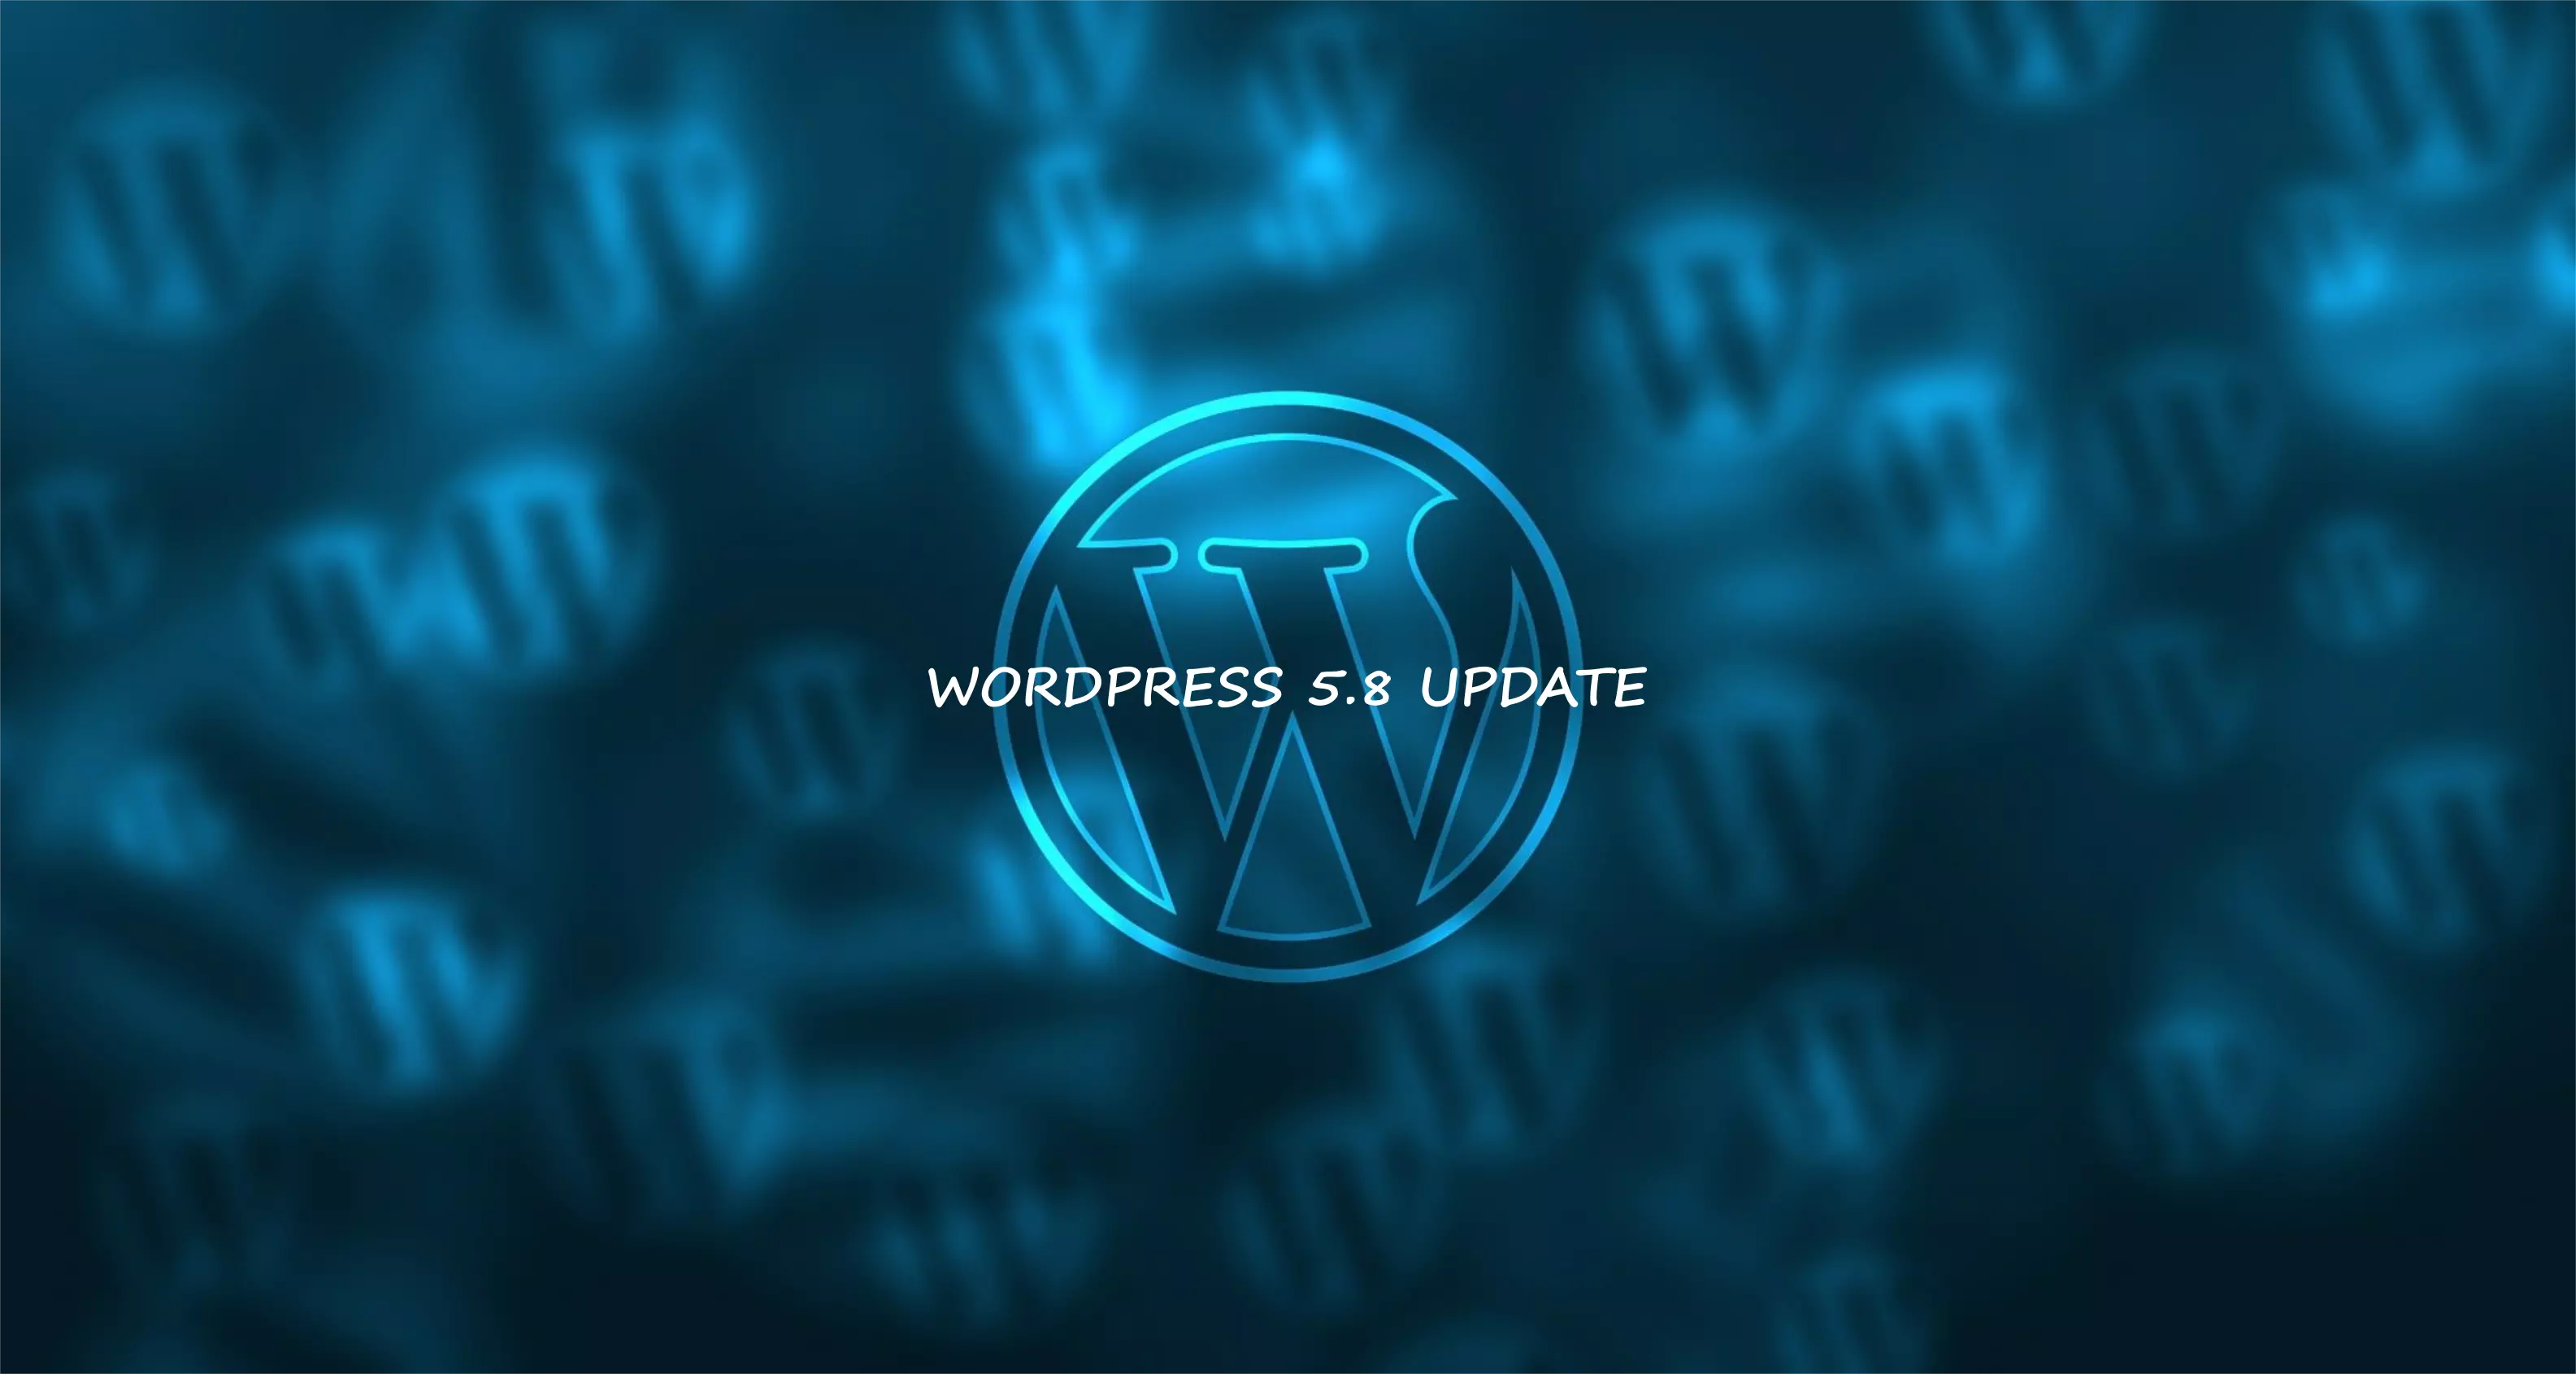 WordPress 5.8 Update – 5 Prominent Features You Can’t Miss